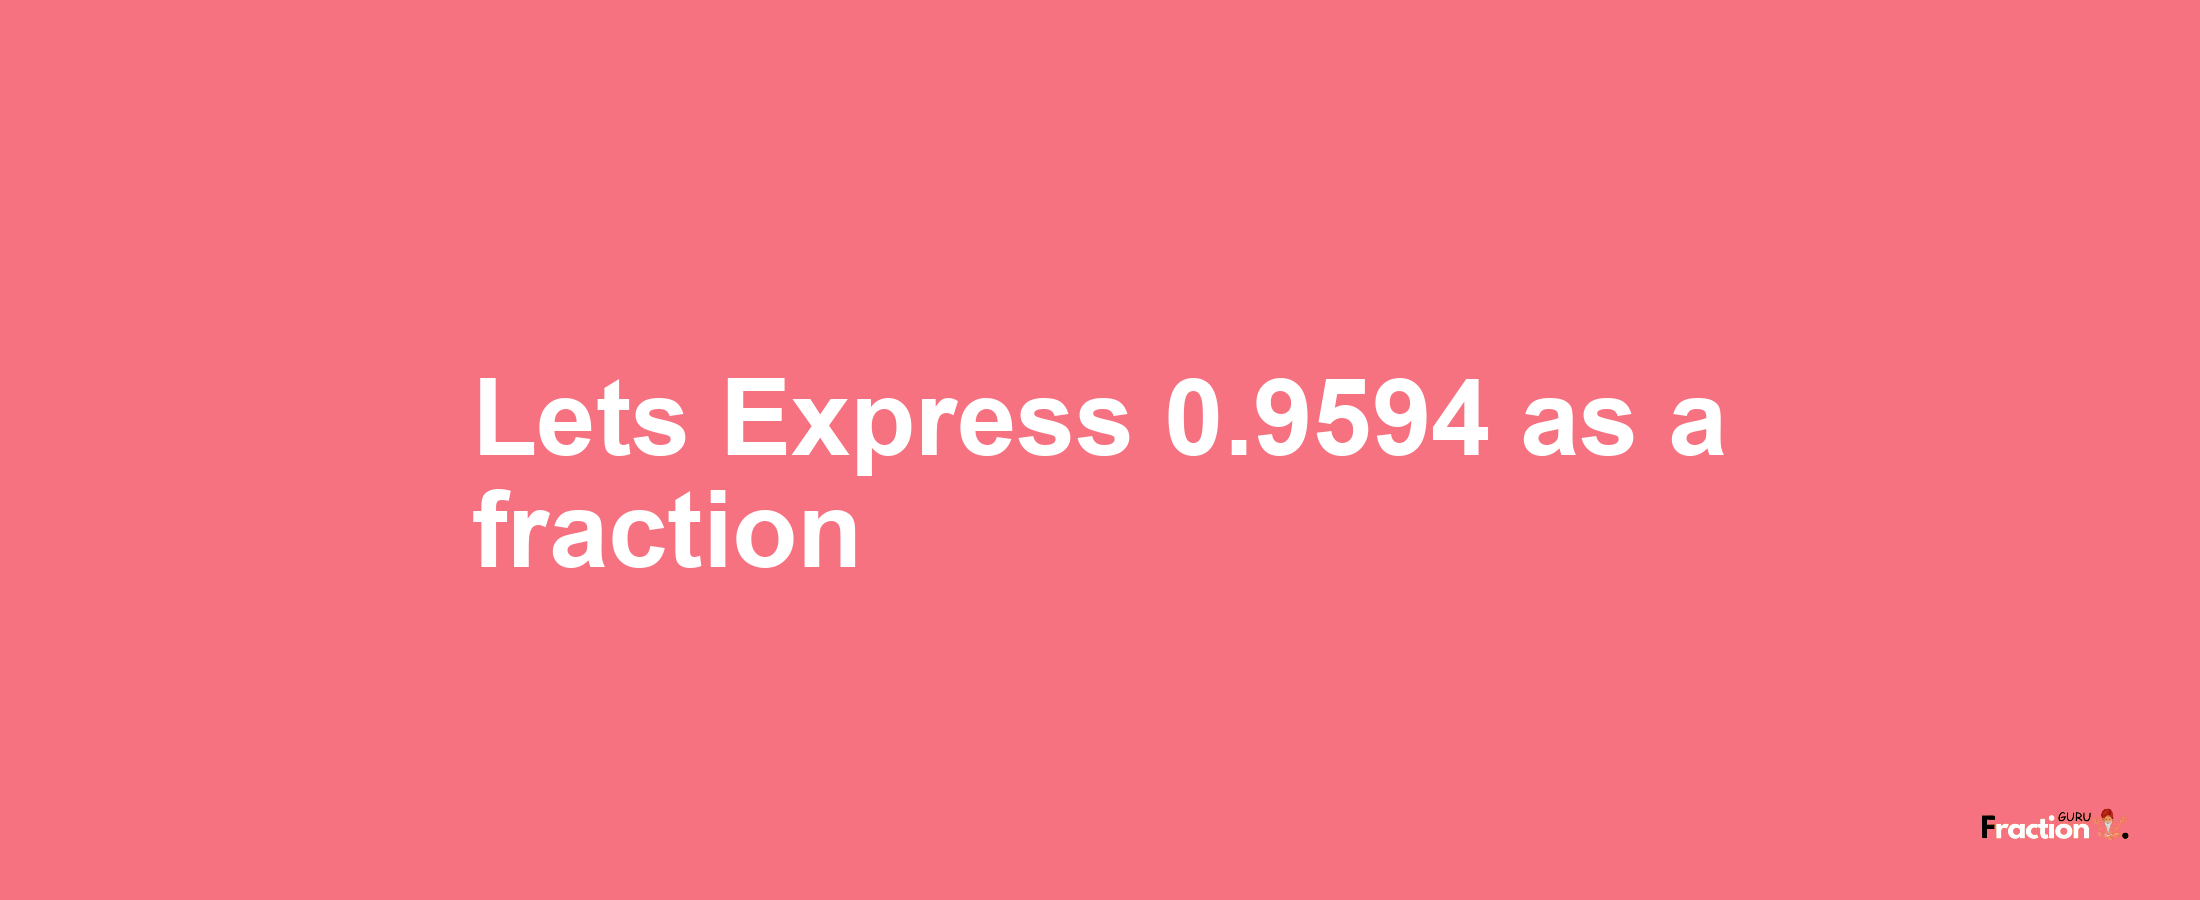 Lets Express 0.9594 as afraction